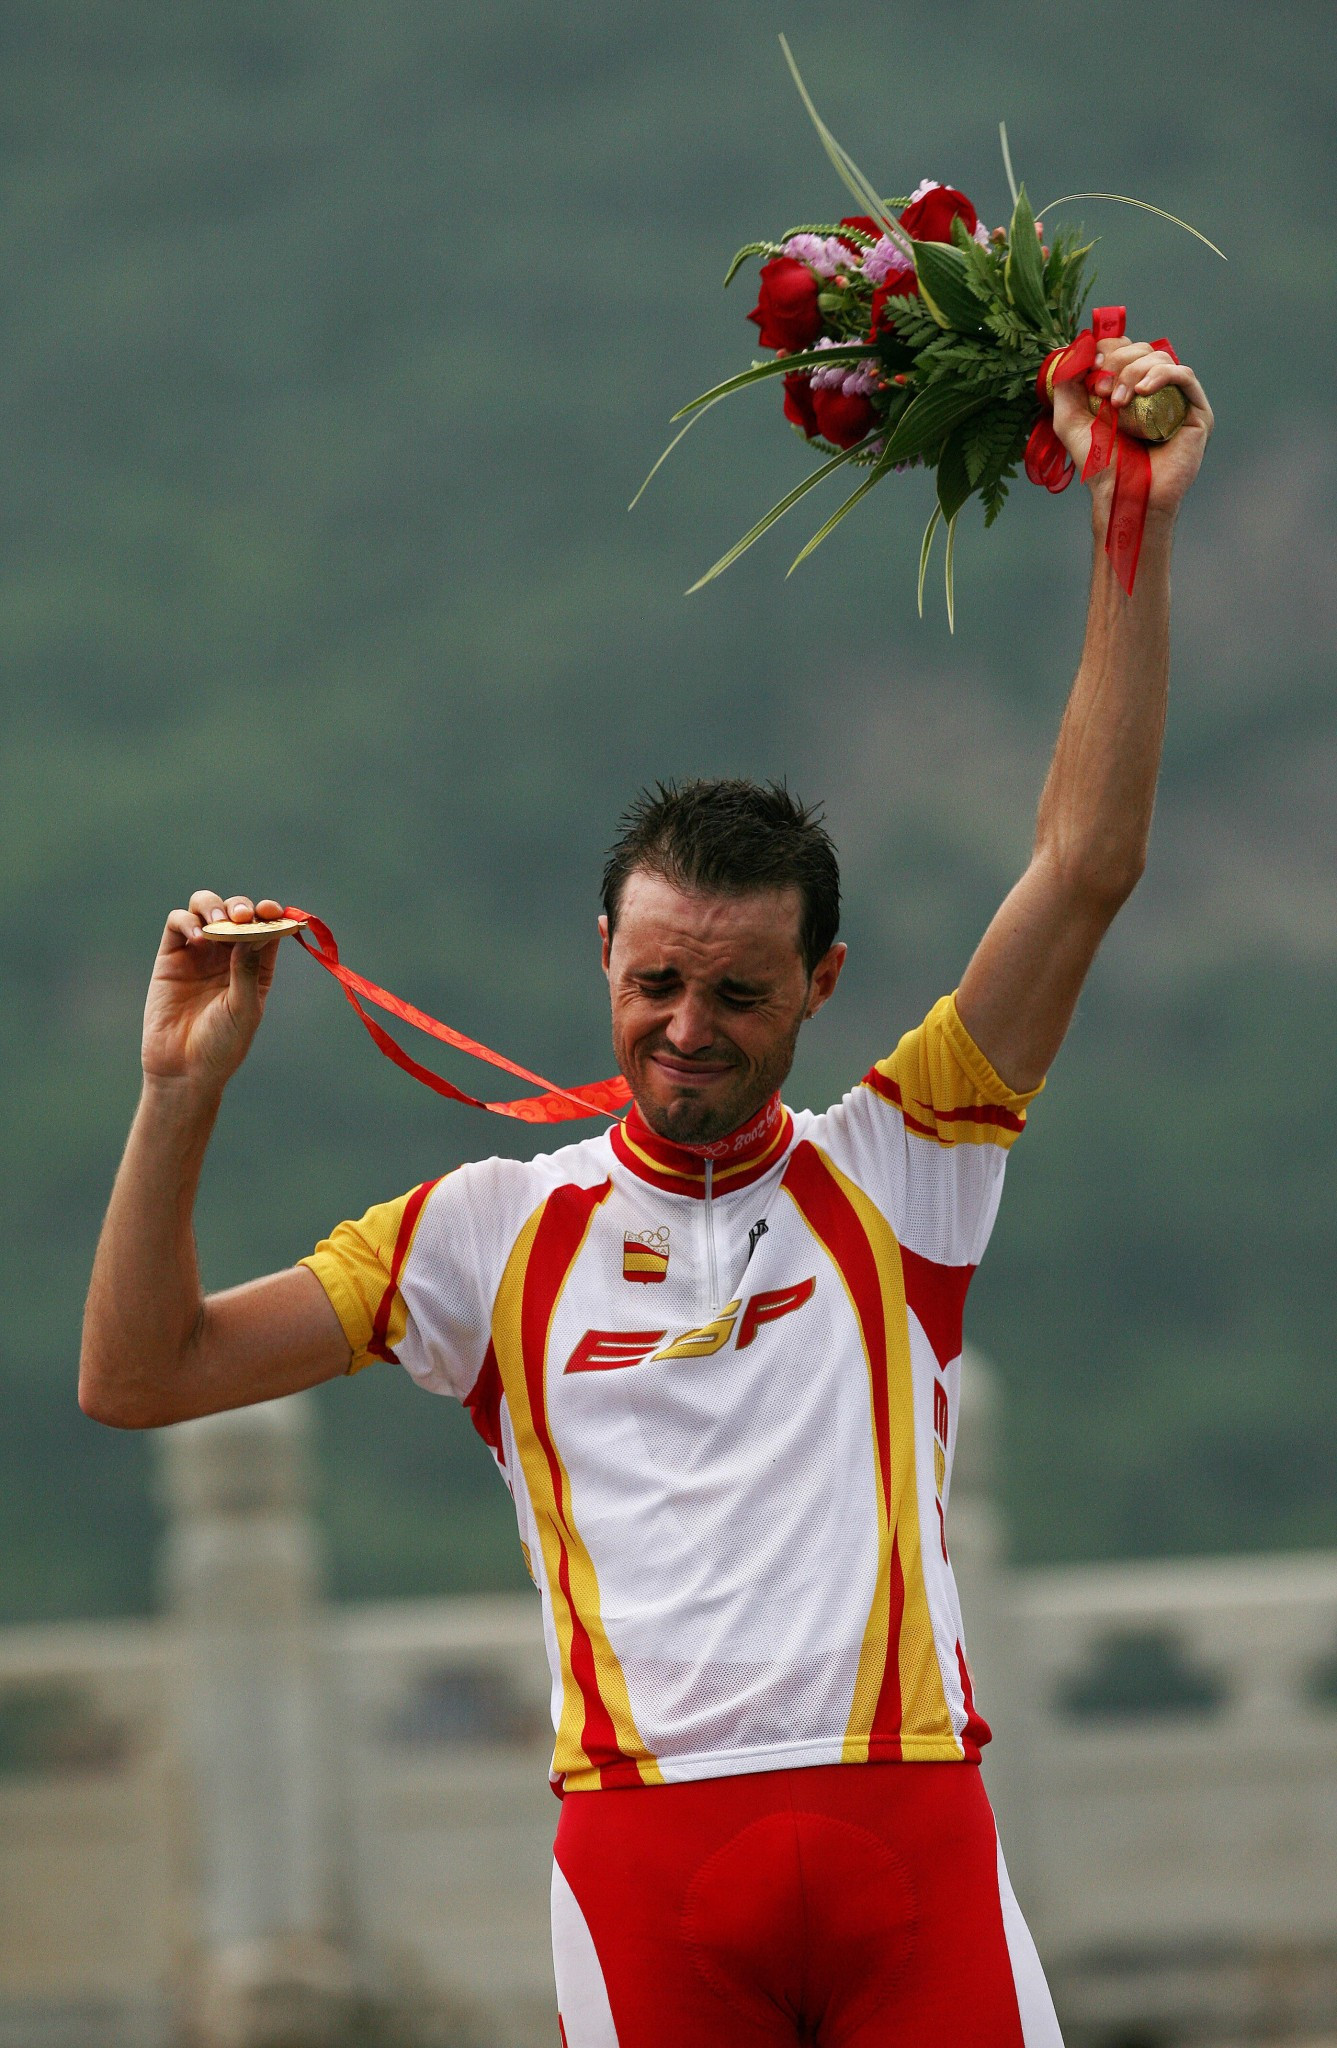 Samuel Sánchez won the Olympic road race title at Beijing 2008 ©Getty Images